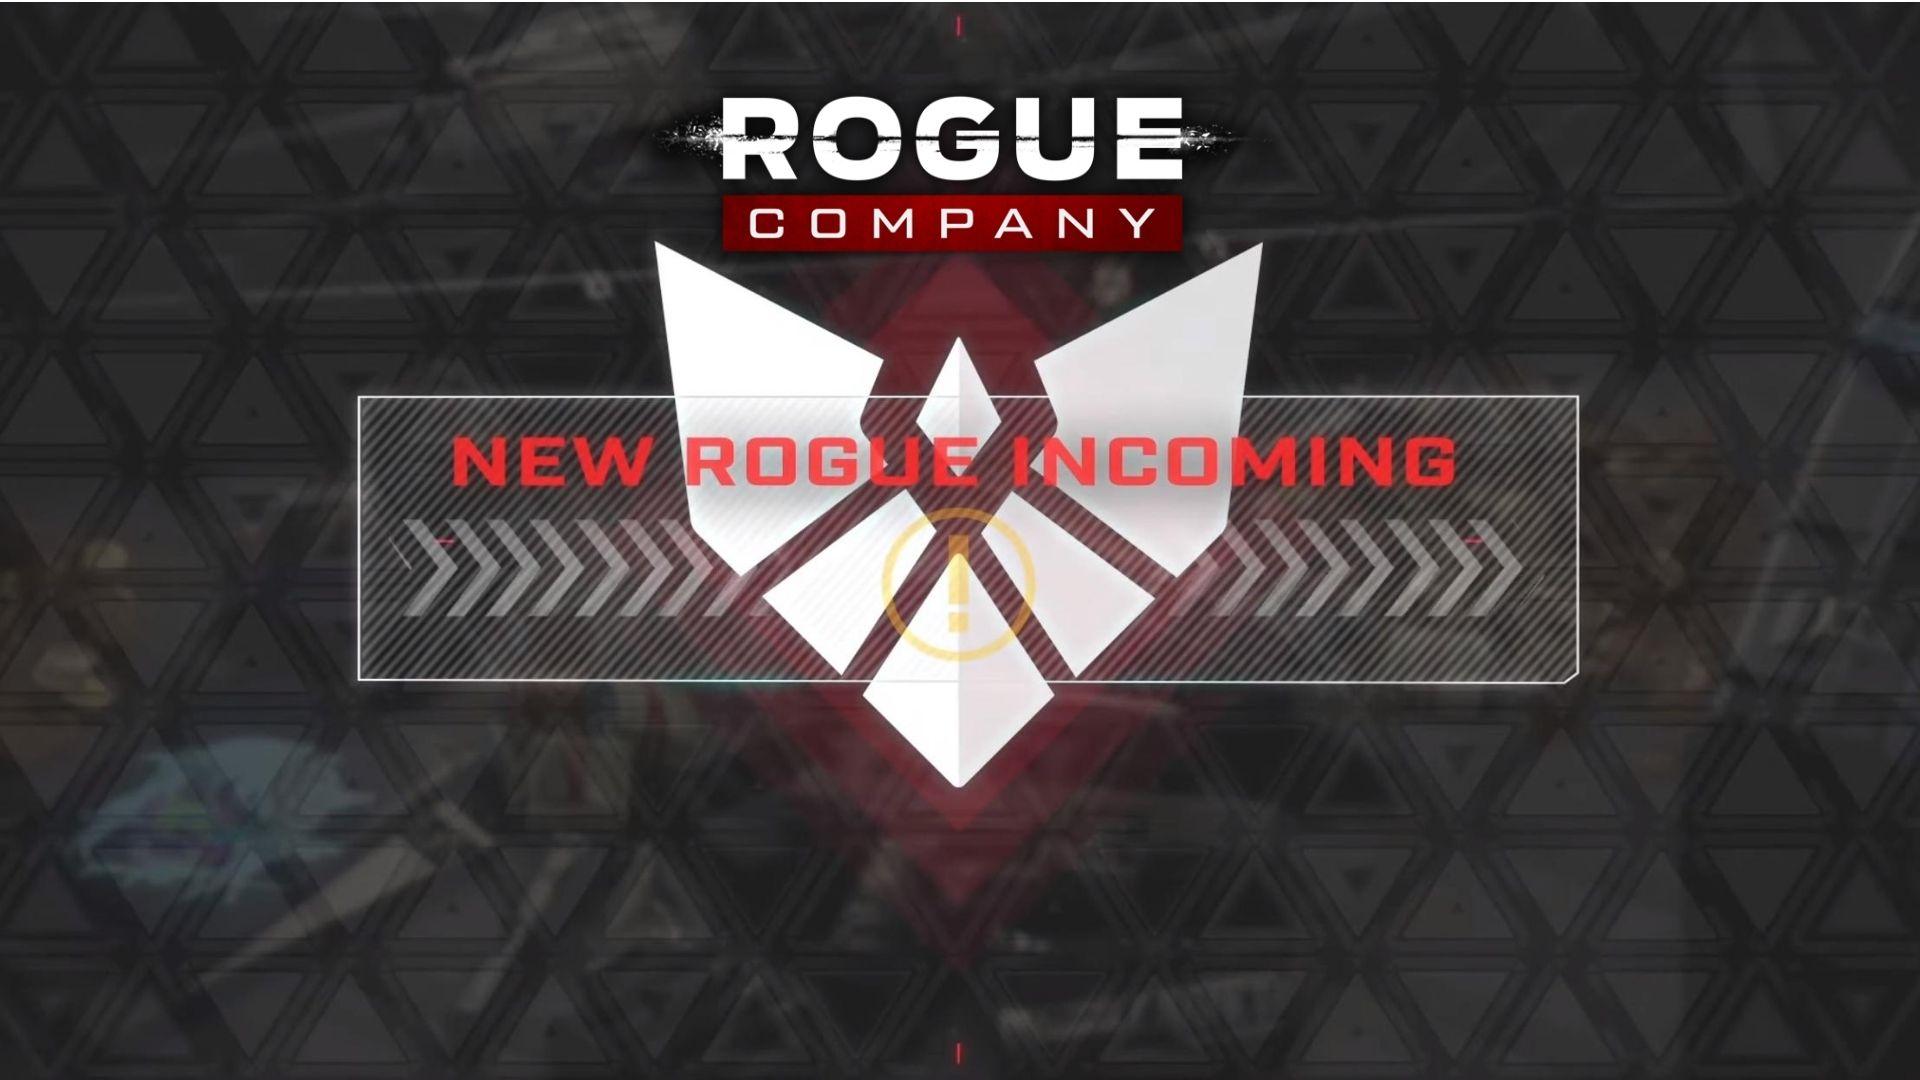 Rogue Company features